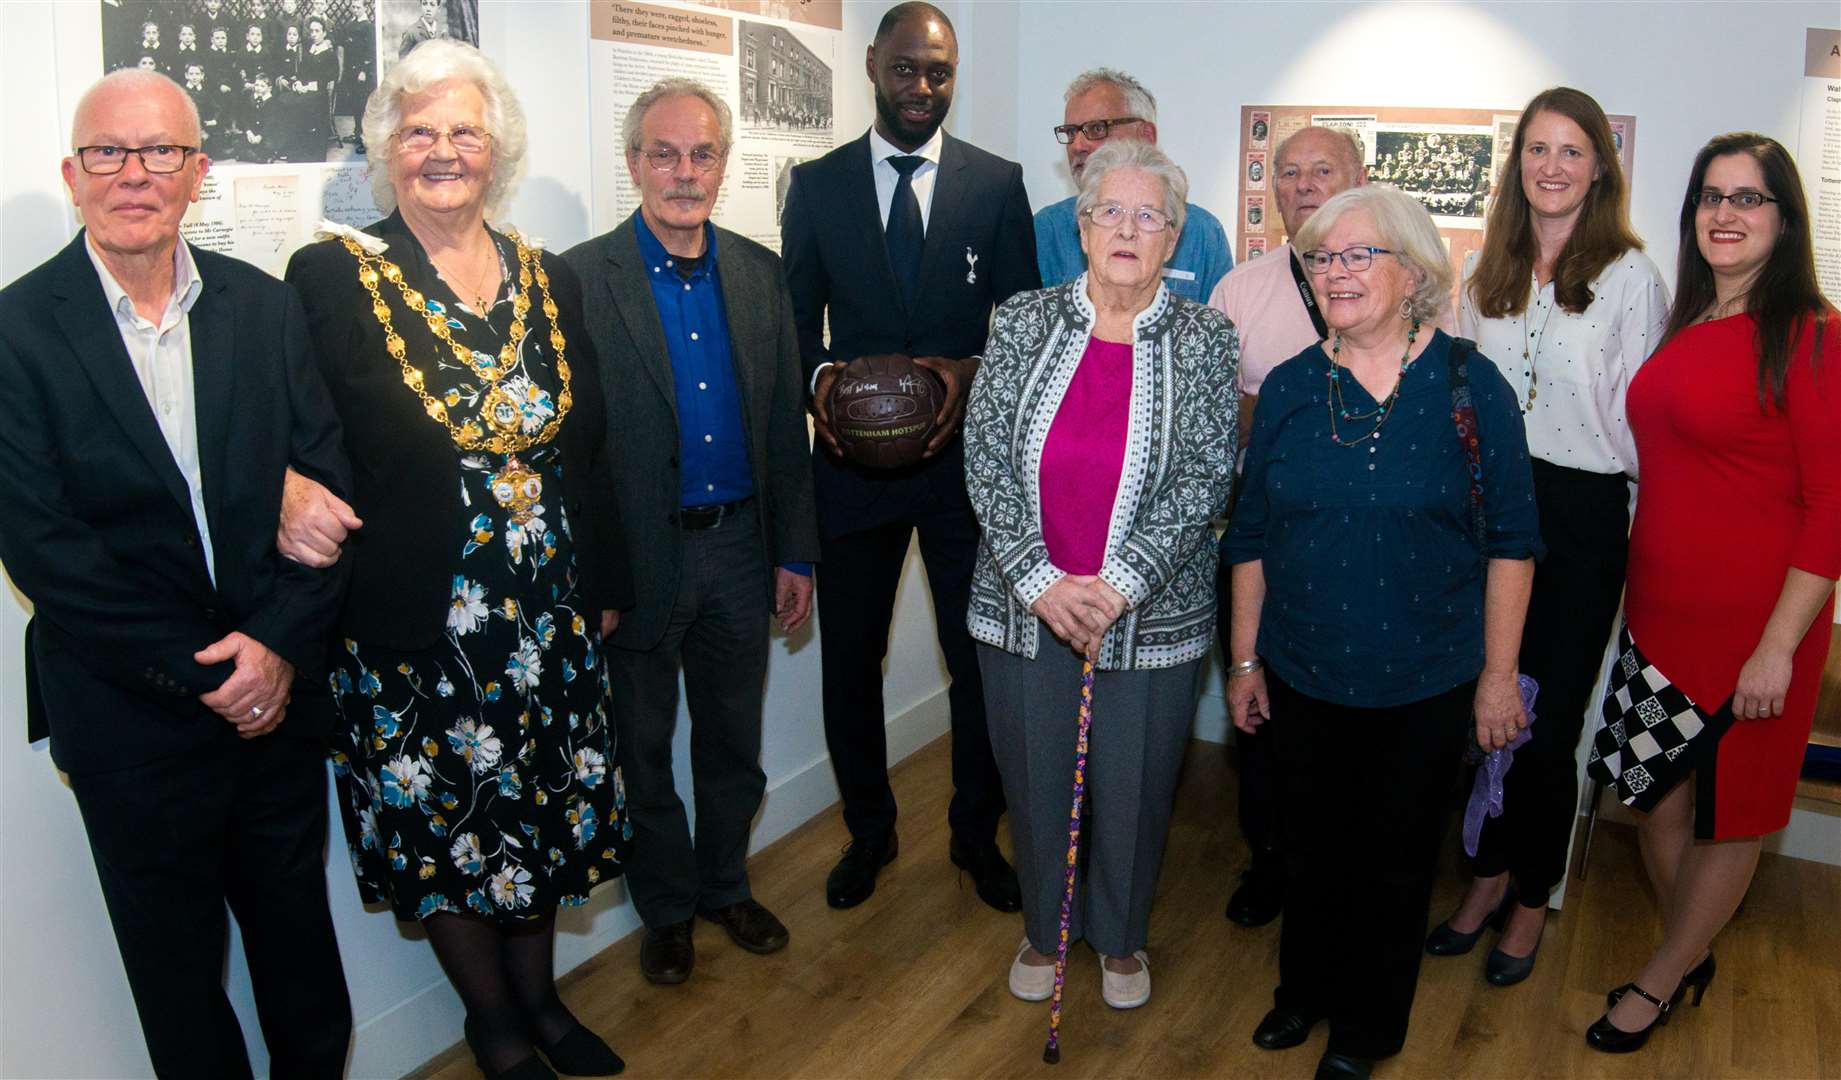 Left to right: Ed Finlayson (Walter’s Nephew), Cllr Ann Berry, Duncan Finlayson (Walter’s Nephew), Ledley King (former Tottenham and England Player), Phil Vasili (Author and Biographer), Rita Humphries (Walter’s Granddaughter), Charles Humphries, Iona Finlayson (Walter’s Niece), Sally Hough, Jen Buchman (4522757)